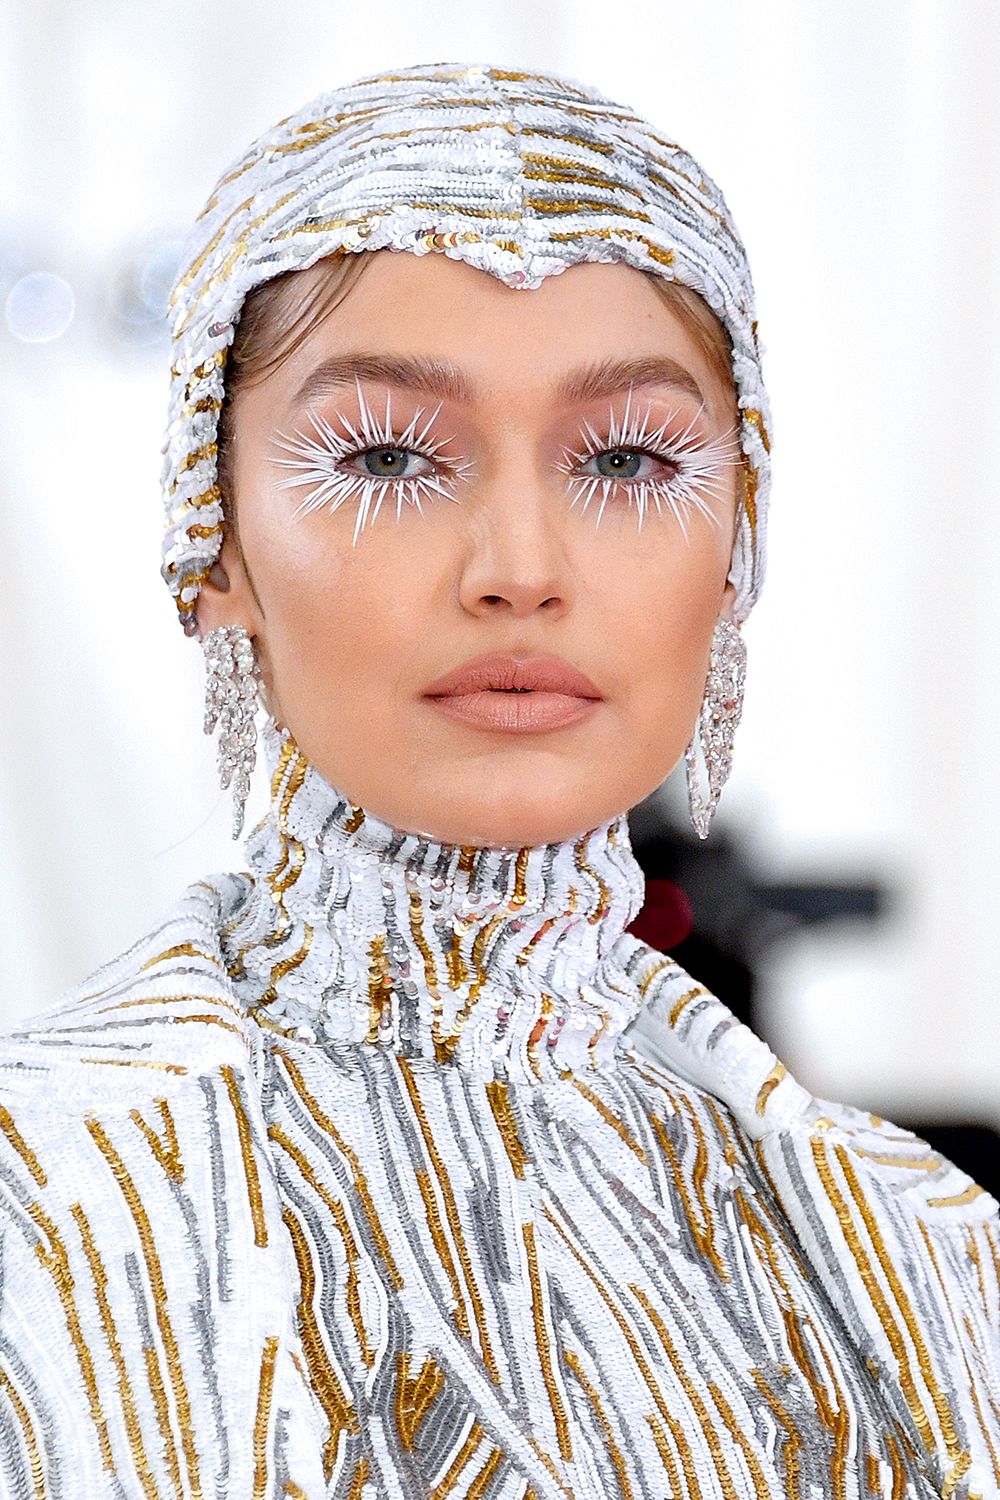 Sophie Turner Wore Glitter in Her Hair to the 2019 Met Gala — Photos